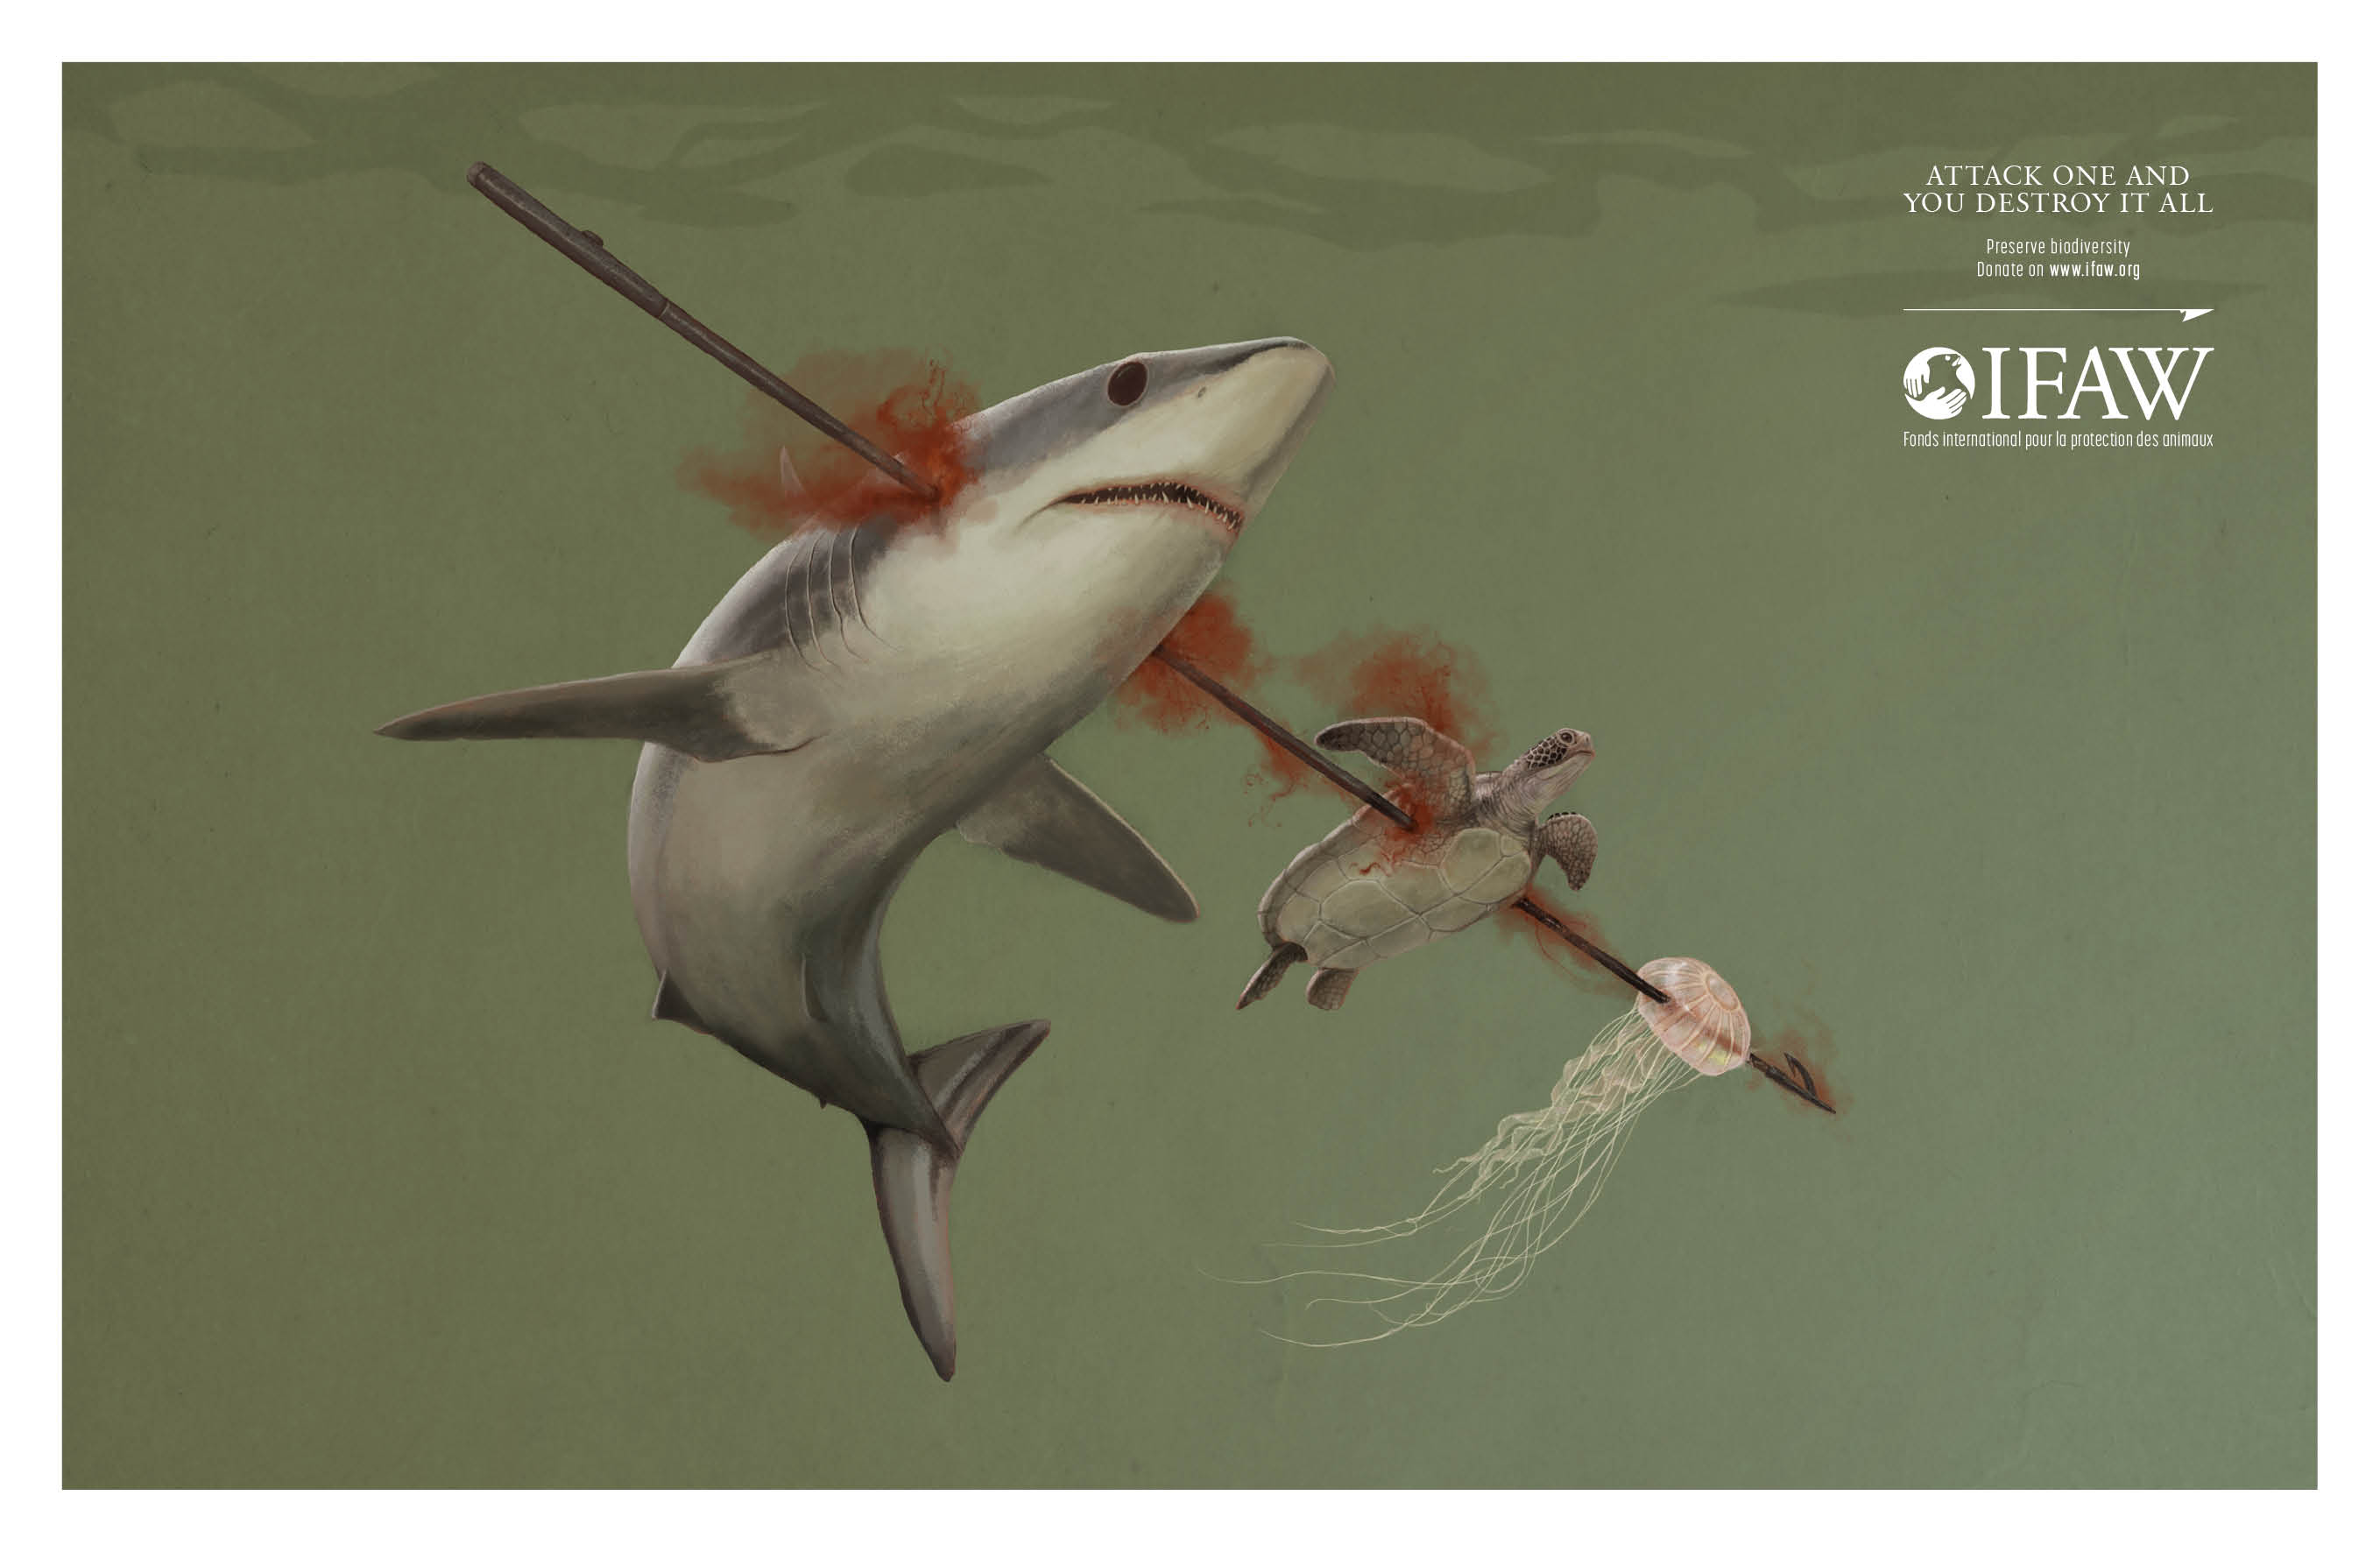 Shocking Illustrations Make a Powerful Point About Biodiversity